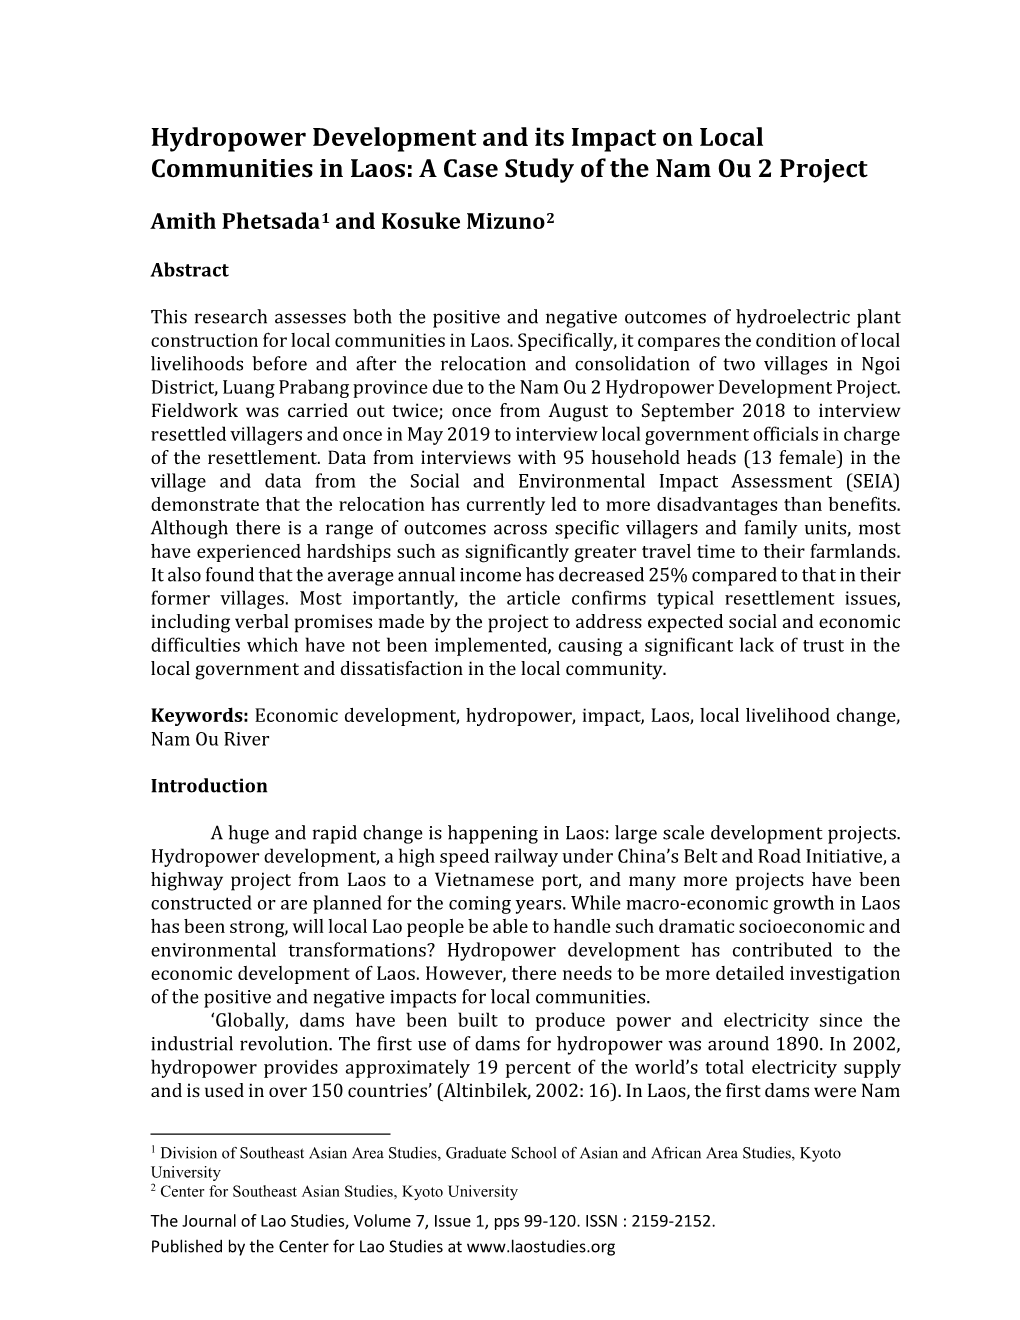 Hydropower Development and Its Impact on Local Communities in Laos: a Case Study of the Nam Ou 2 Project